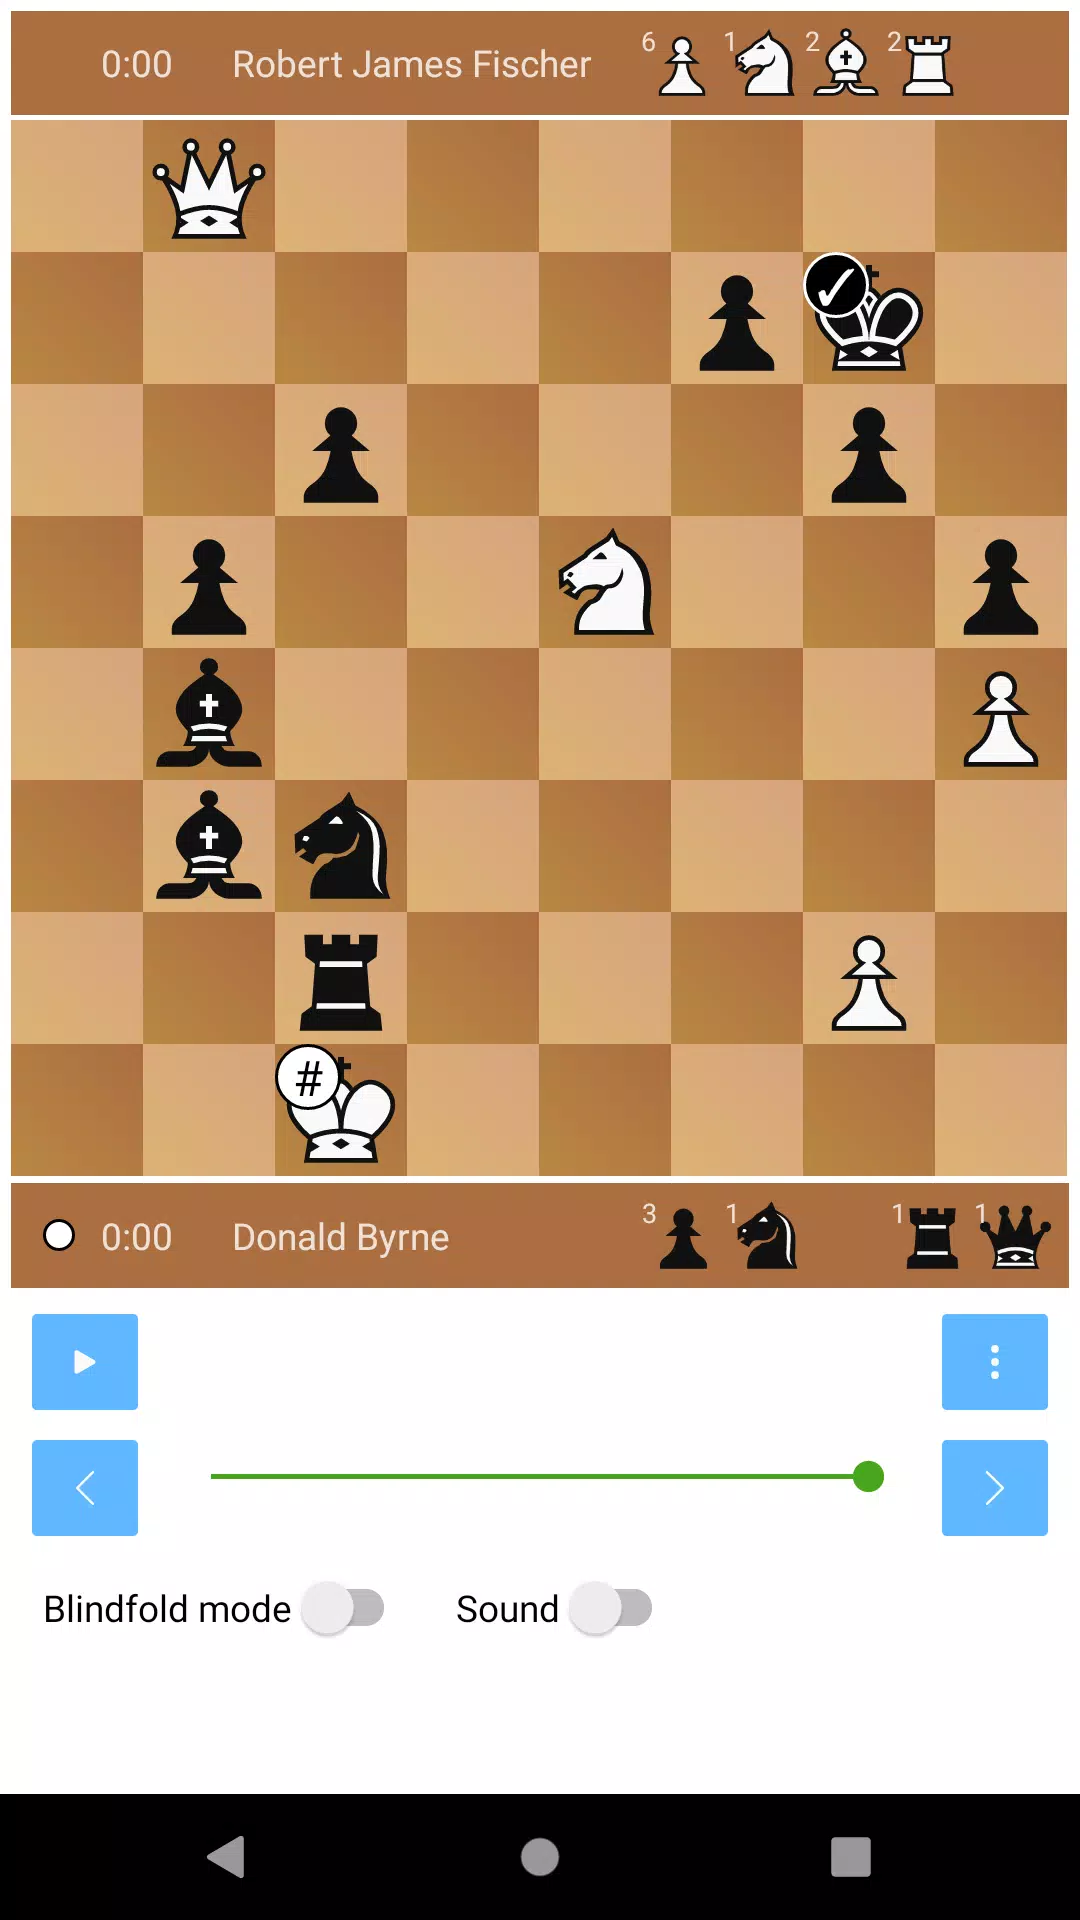 ChessBox APK for Android Download